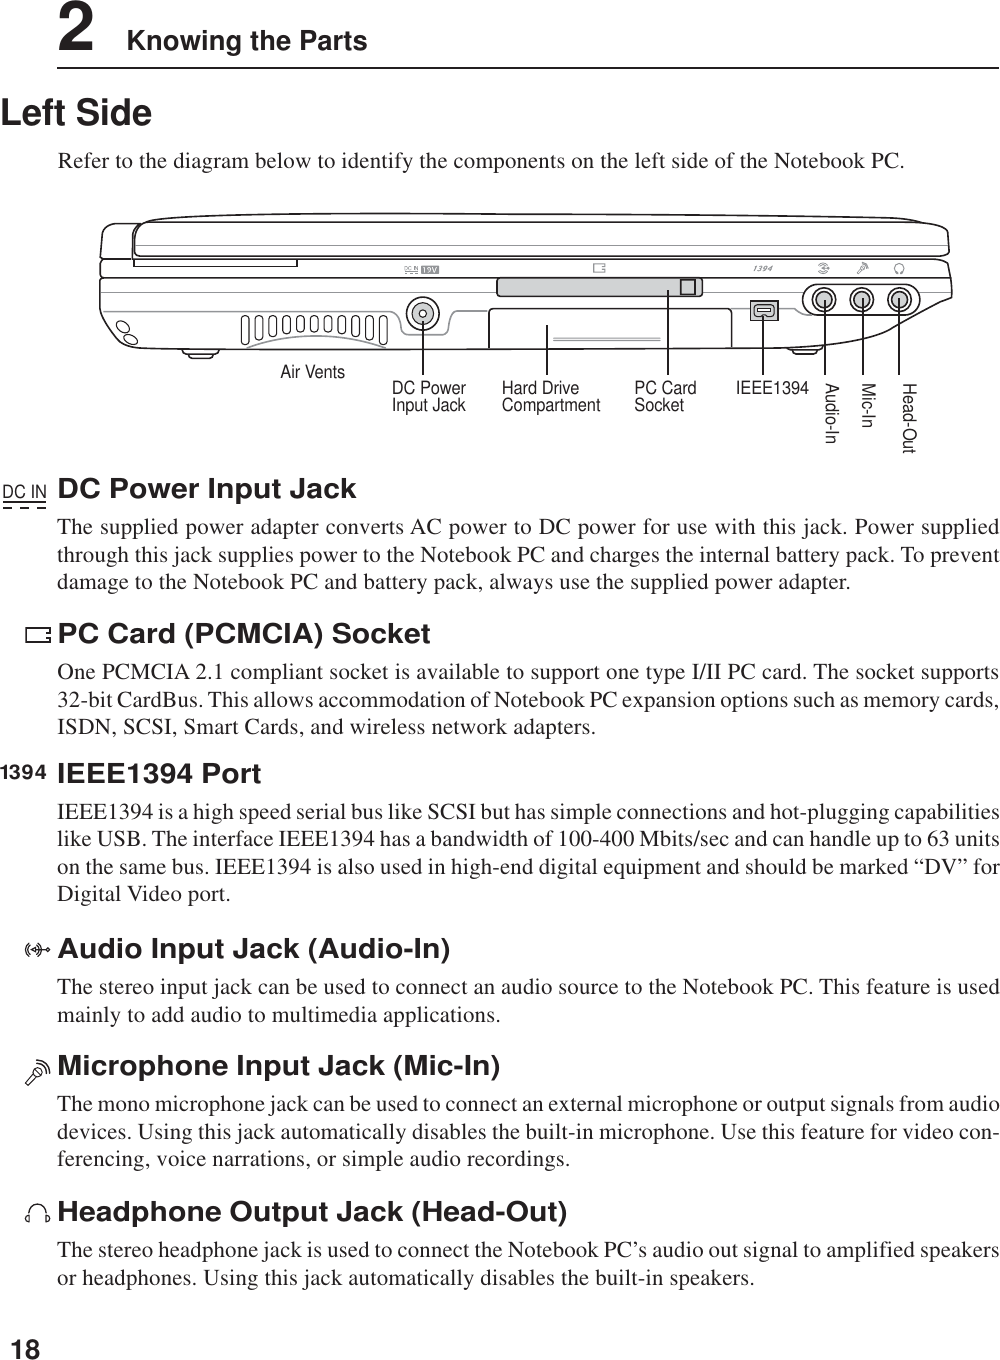 182    Knowing the PartsLeft SideRefer to the diagram below to identify the components on the left side of the Notebook PC.Microphone Input Jack (Mic-In)The mono microphone jack can be used to connect an external microphone or output signals from audiodevices. Using this jack automatically disables the built-in microphone. Use this feature for video con-ferencing, voice narrations, or simple audio recordings.Headphone Output Jack (Head-Out)The stereo headphone jack is used to connect the Notebook PC’s audio out signal to amplified speakersor headphones. Using this jack automatically disables the built-in speakers.PC Card (PCMCIA) SocketOne PCMCIA 2.1 compliant socket is available to support one type I/II PC card. The socket supports32-bit CardBus. This allows accommodation of Notebook PC expansion options such as memory cards,ISDN, SCSI, Smart Cards, and wireless network adapters.1394IEEE1394 PortIEEE1394 is a high speed serial bus like SCSI but has simple connections and hot-plugging capabilitieslike USB. The interface IEEE1394 has a bandwidth of 100-400 Mbits/sec and can handle up to 63 unitson the same bus. IEEE1394 is also used in high-end digital equipment and should be marked “DV” forDigital Video port.Audio Input Jack (Audio-In)The stereo input jack can be used to connect an audio source to the Notebook PC. This feature is usedmainly to add audio to multimedia applications.DC INDC Power Input JackThe supplied power adapter converts AC power to DC power for use with this jack. Power suppliedthrough this jack supplies power to the Notebook PC and charges the internal battery pack. To preventdamage to the Notebook PC and battery pack, always use the supplied power adapter.Air Vents IEEE1394PC CardSocketDC PowerInput JackMic-InHead-OutHard DriveCompartmentAudio-In